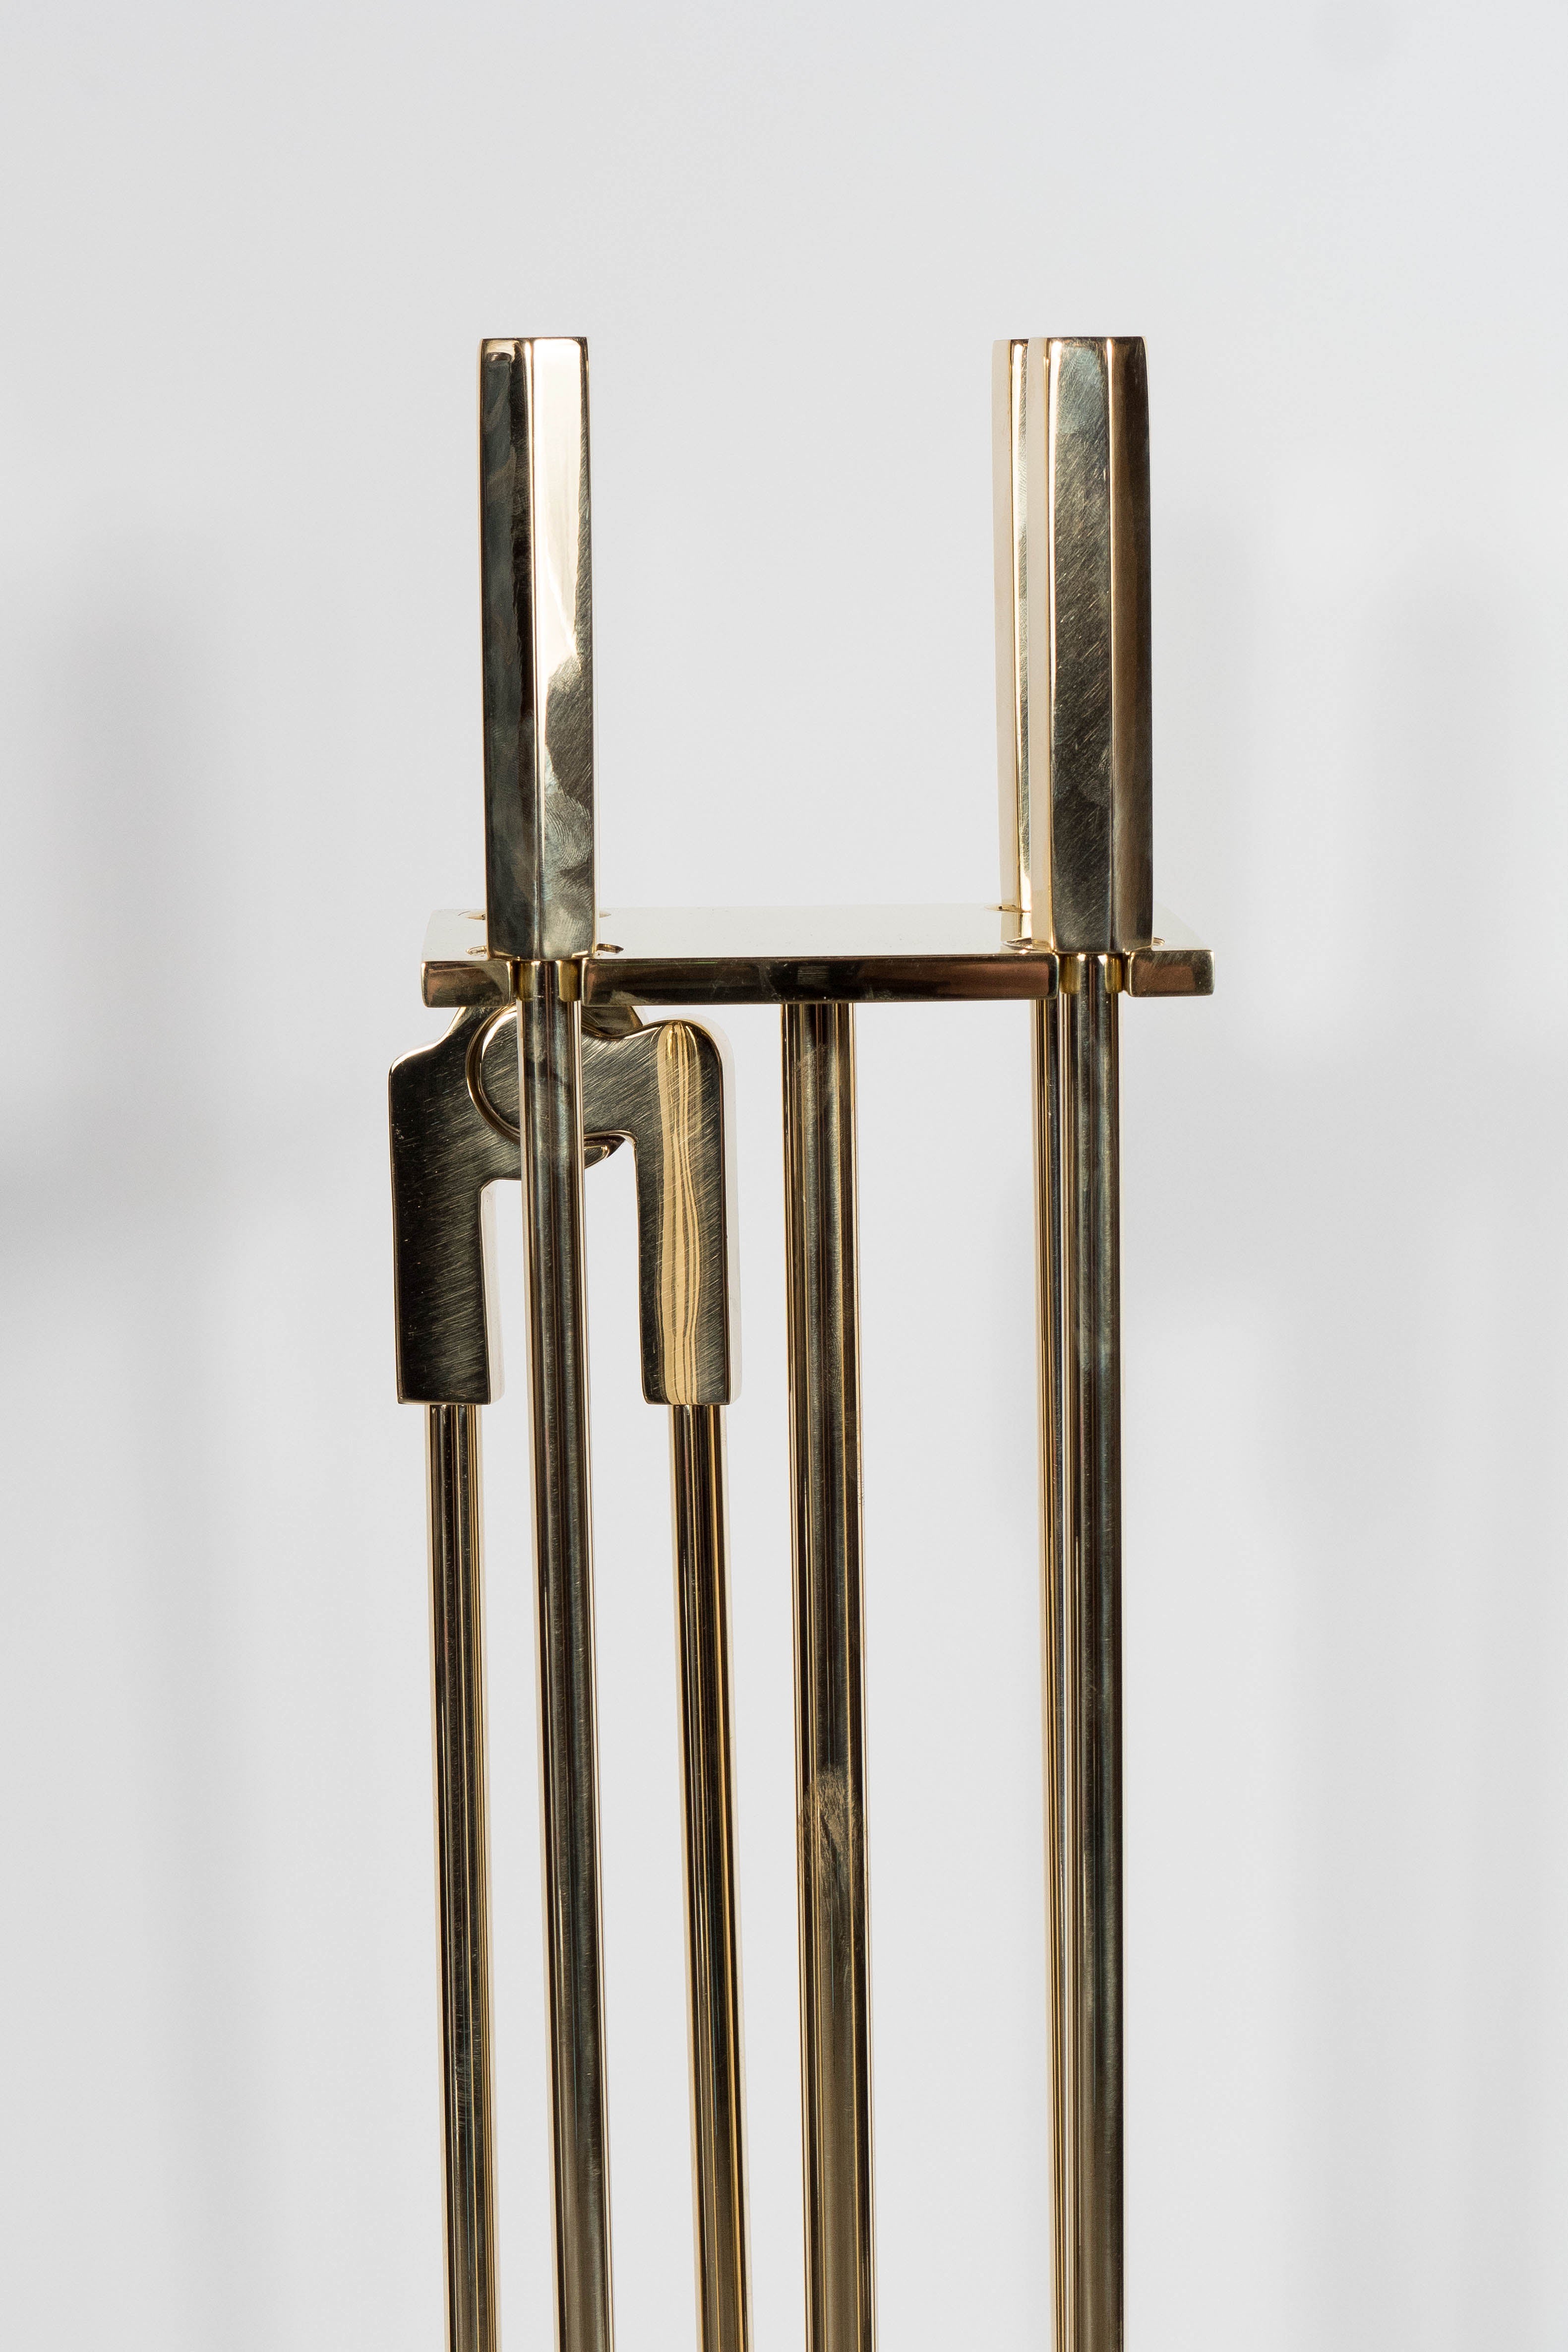 American Custom Modernist Four-Piece Fire Tool Set in Polished Brass